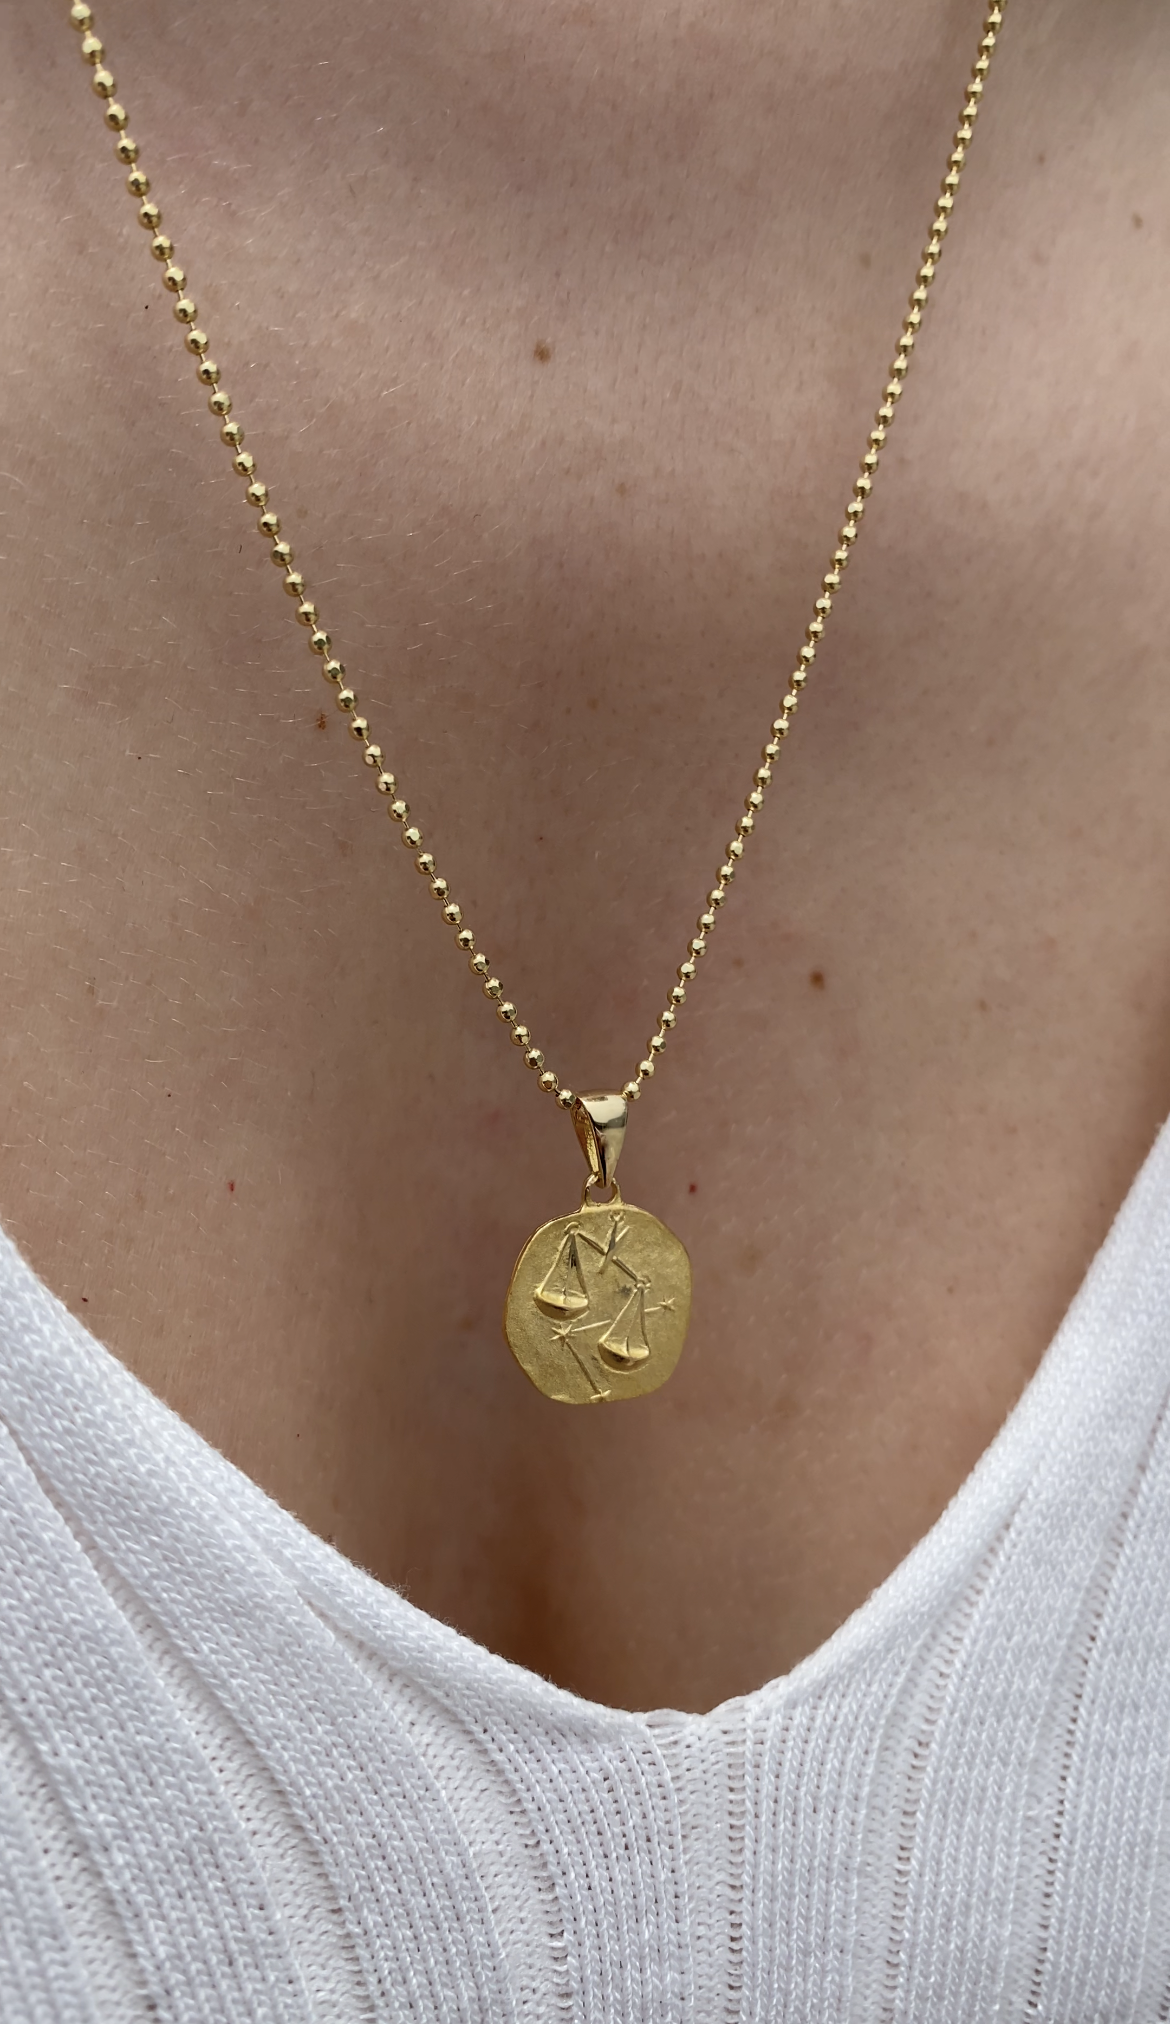 14K Gold Zodiac Libra Necklace - Libra Pendant - Ideal Gift for Astrology Enthusiasts